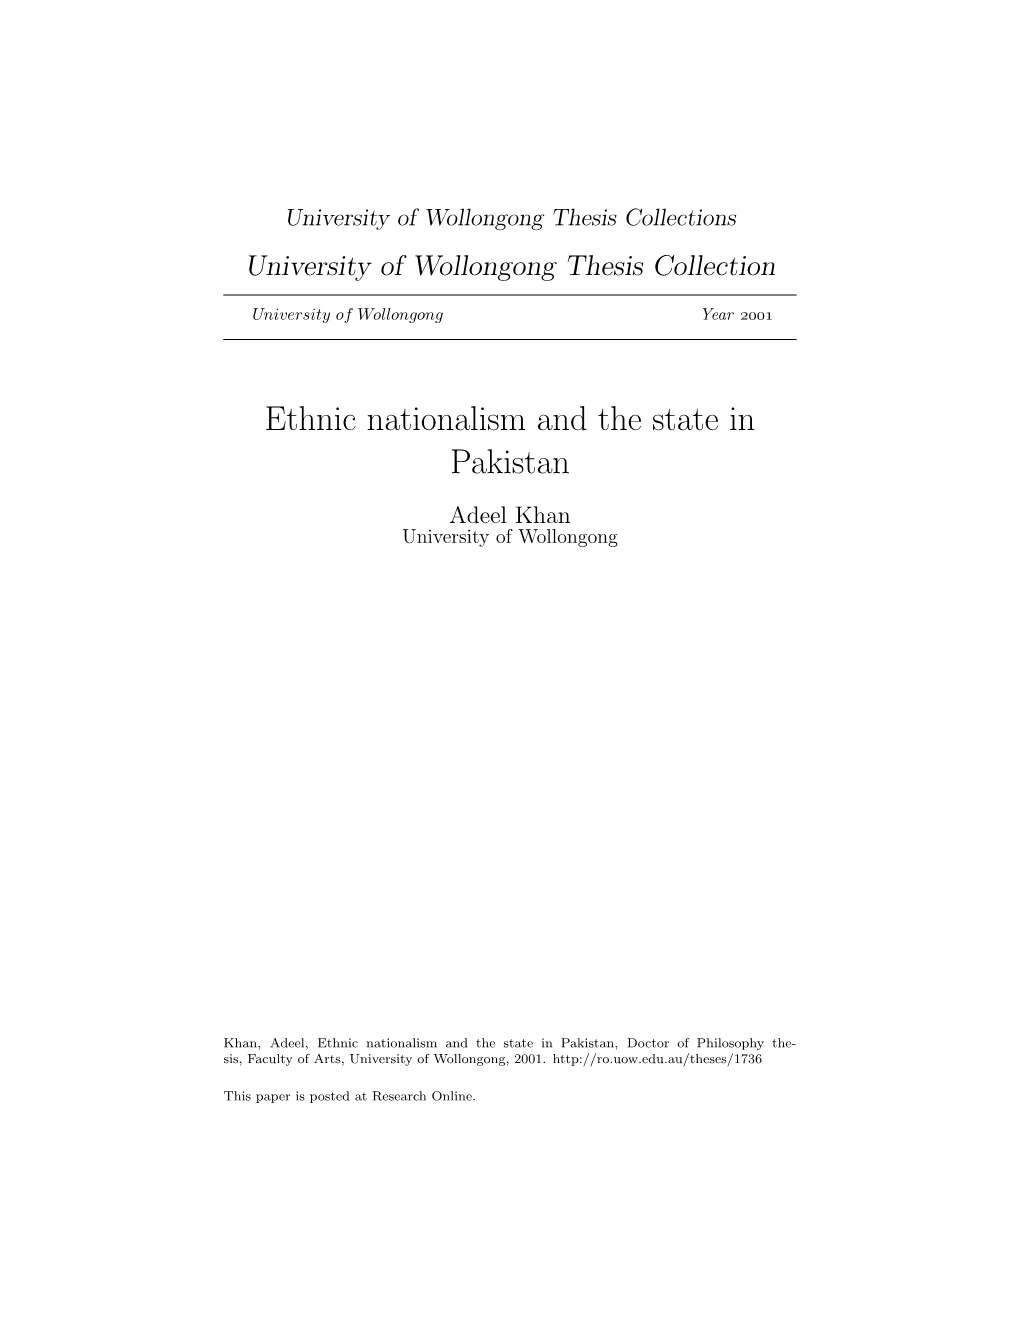 Ethnic Nationalism and the State in Pakistan Adeel Khan University of Wollongong